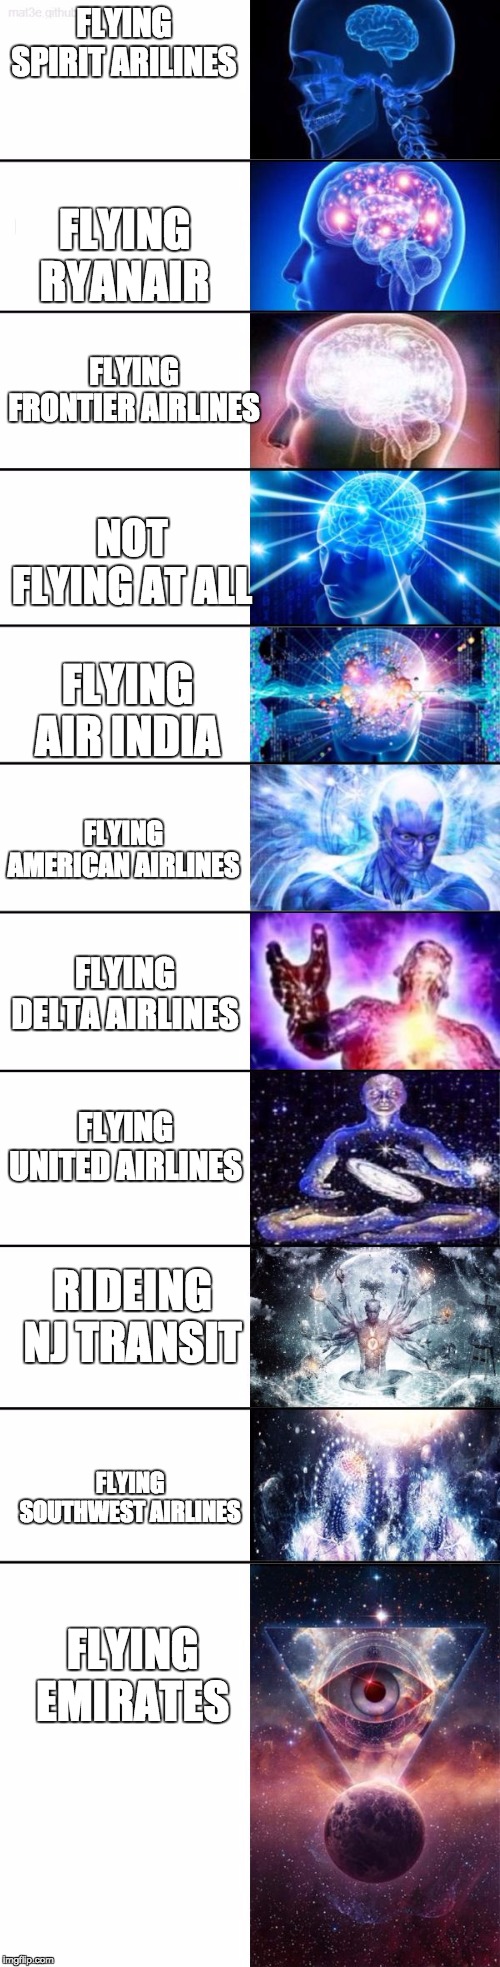 Extended Expanding Brain | FLYING SPIRIT ARILINES; FLYING RYANAIR; FLYING FRONTIER AIRLINES; NOT FLYING AT ALL; FLYING AIR INDIA; FLYING AMERICAN AIRLINES; FLYING DELTA AIRLINES; FLYING UNITED AIRLINES; RIDEING NJ TRANSIT; FLYING SOUTHWEST AIRLINES; FLYING EMIRATES | image tagged in extended expanding brain | made w/ Imgflip meme maker